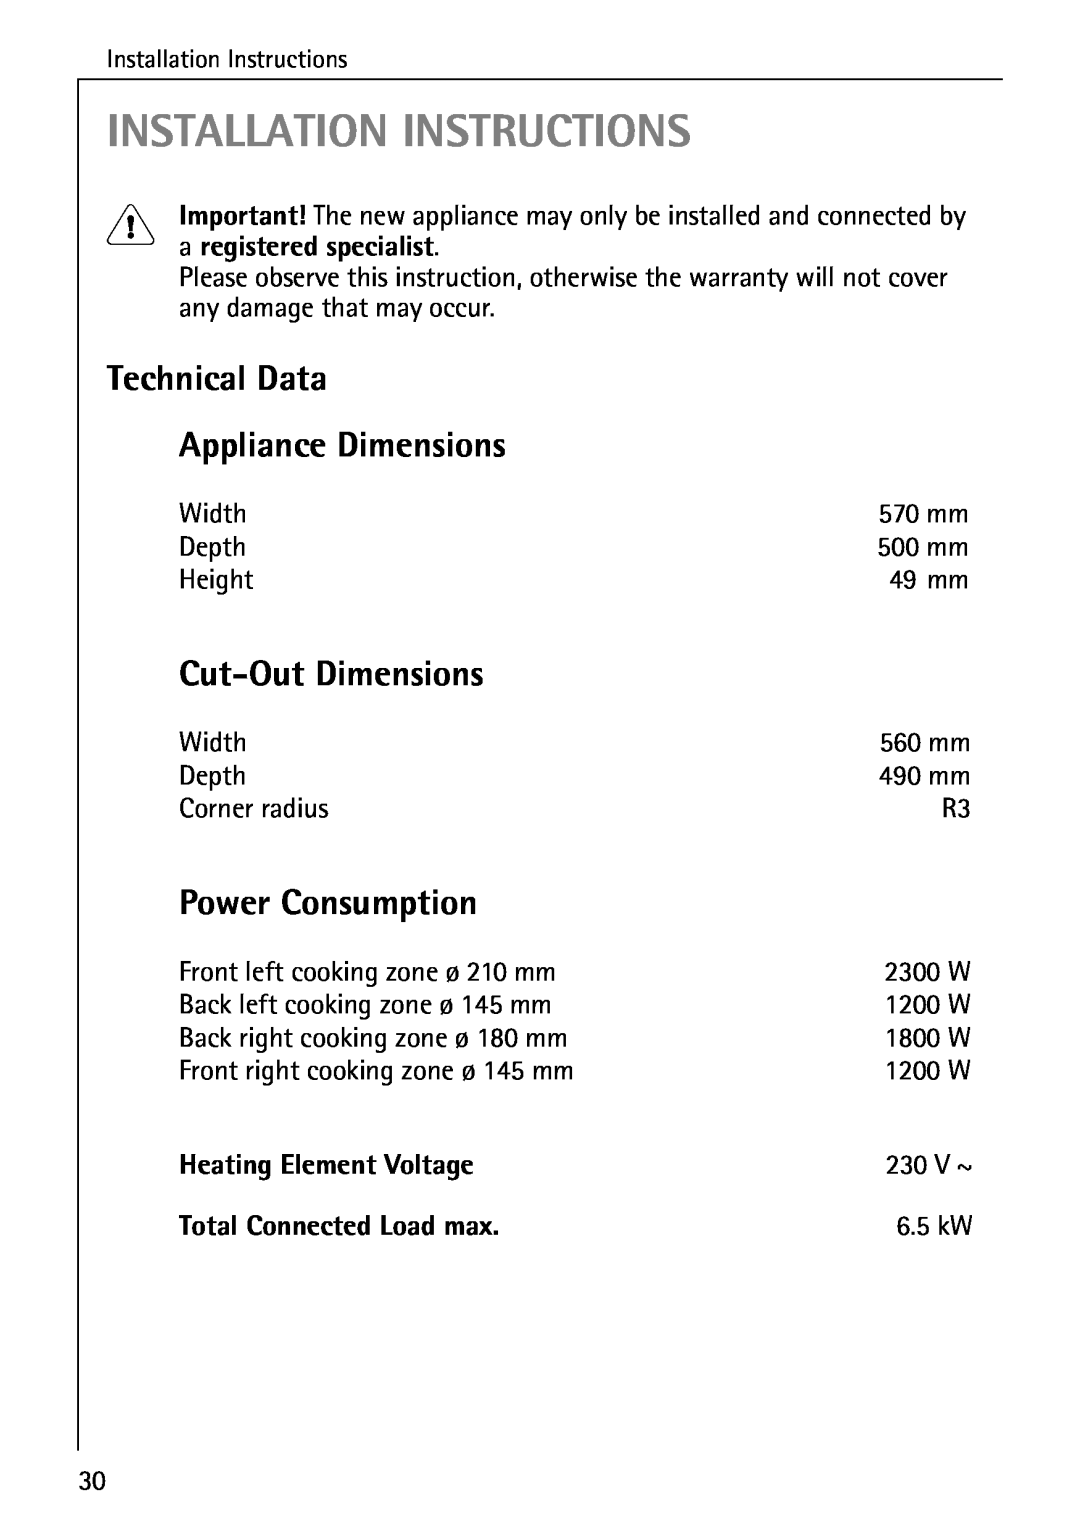 Electrolux C65030K Installation Instructions, Technical Data Appliance Dimensions, Cut-OutDimensions, Power Consumption 